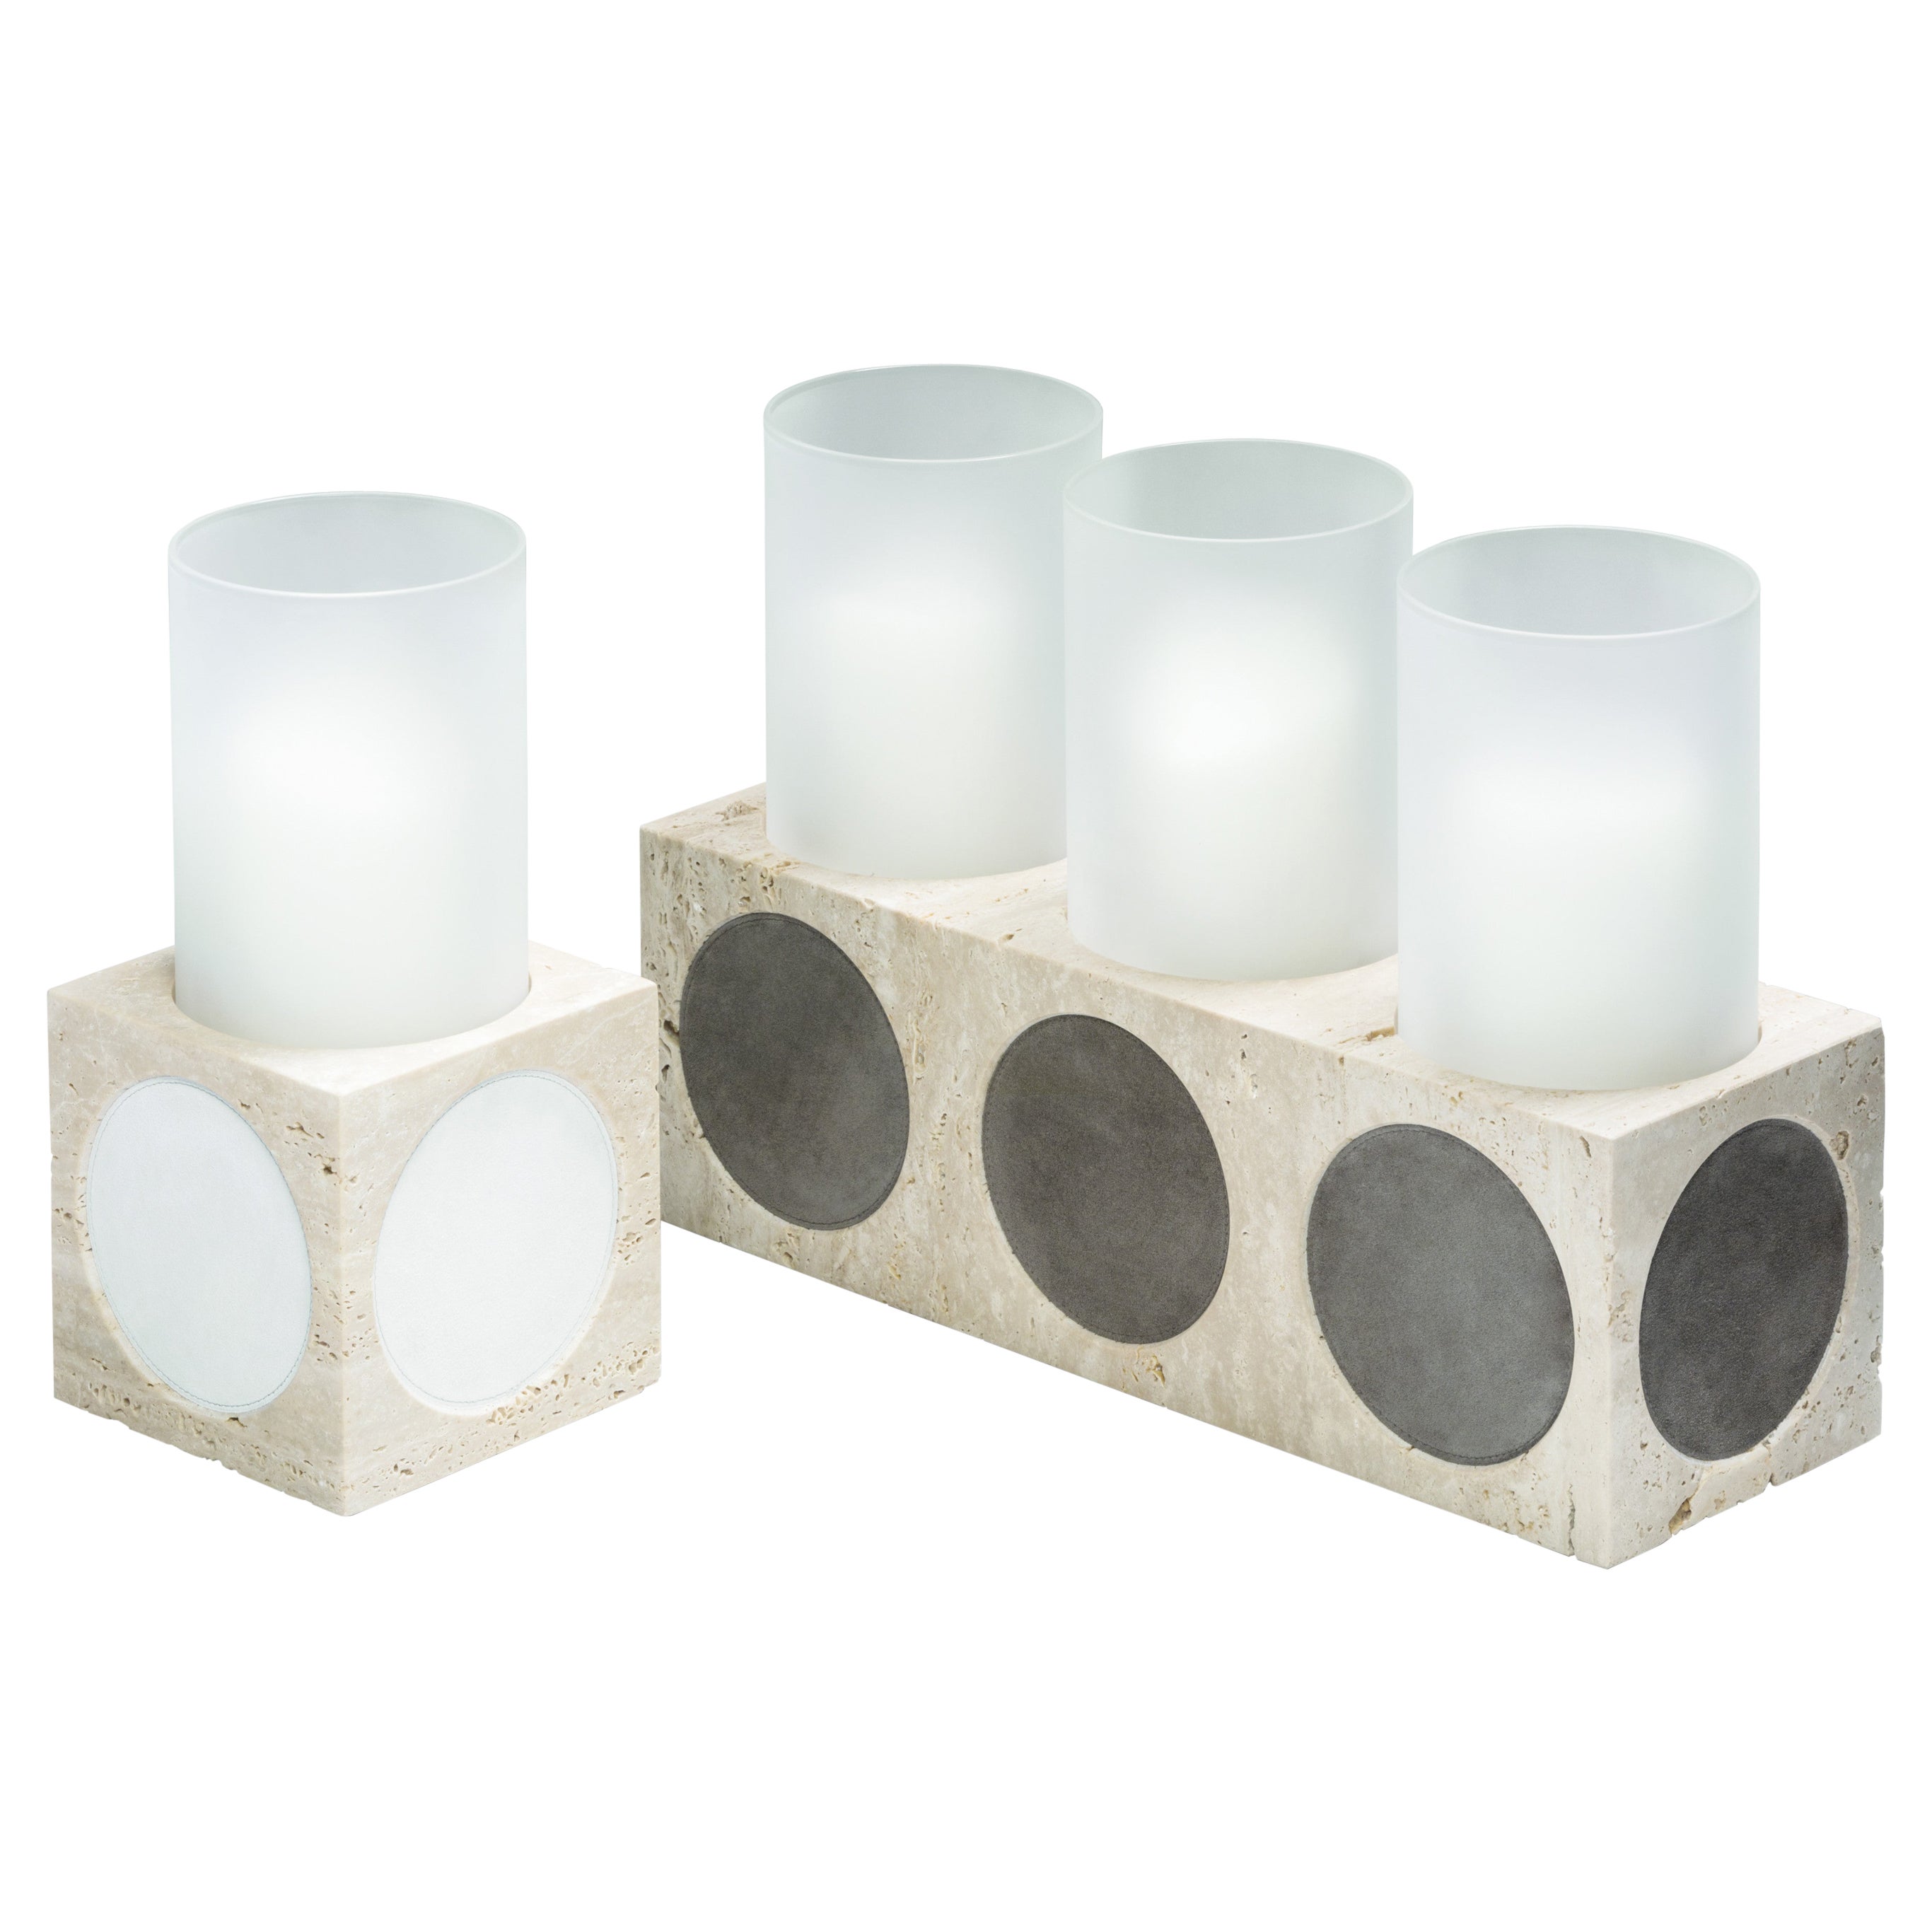 Palazzo Candle Holder Triple -- Stephane Parmentier x Giobagnara

Available in printed calfskin, suede, nappa finish.

Embracing sleek designs and beautiful materials, the Stephane Parmentier Collection for Giobagnara epitomizes a commitment to